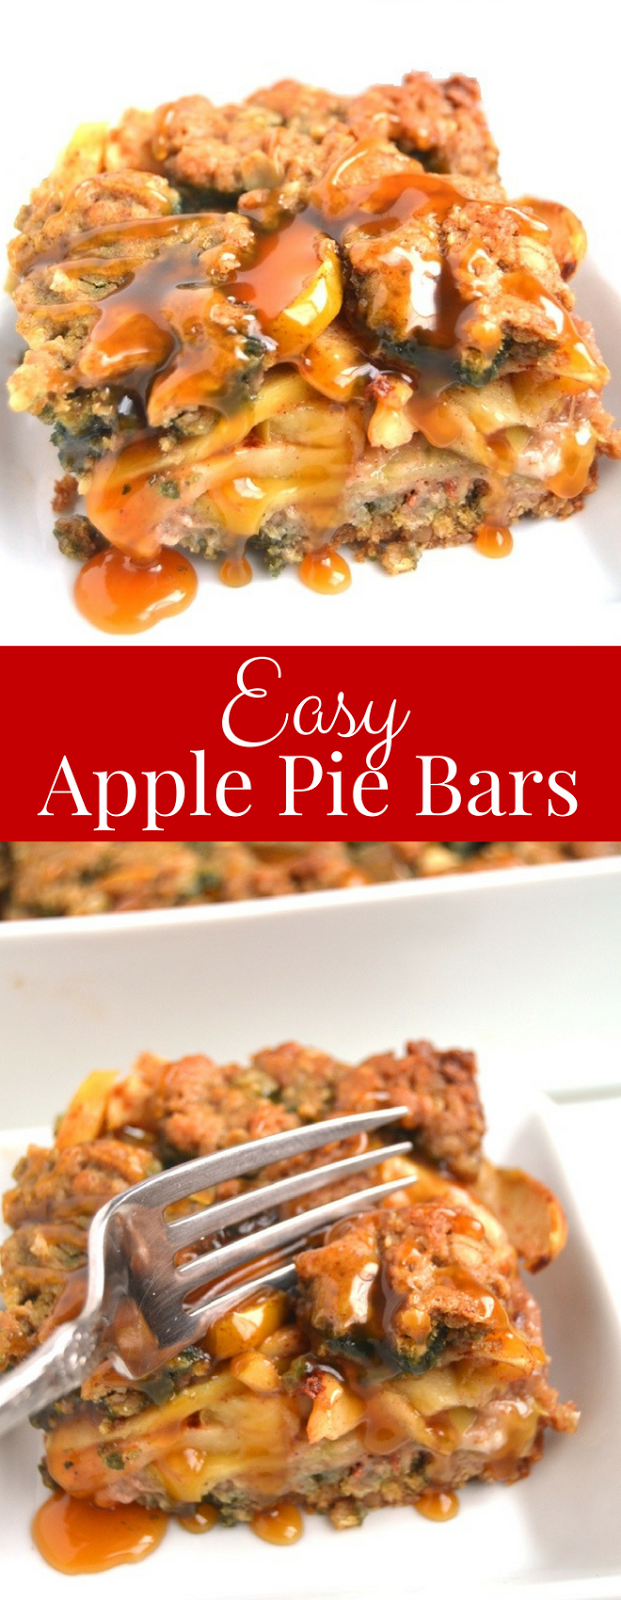 Easy Apple Pie Bars feature a layered whole-grain flavorful crust with soft and gooey apples for the perfect simple dessert! www.nutritionistreviews.com